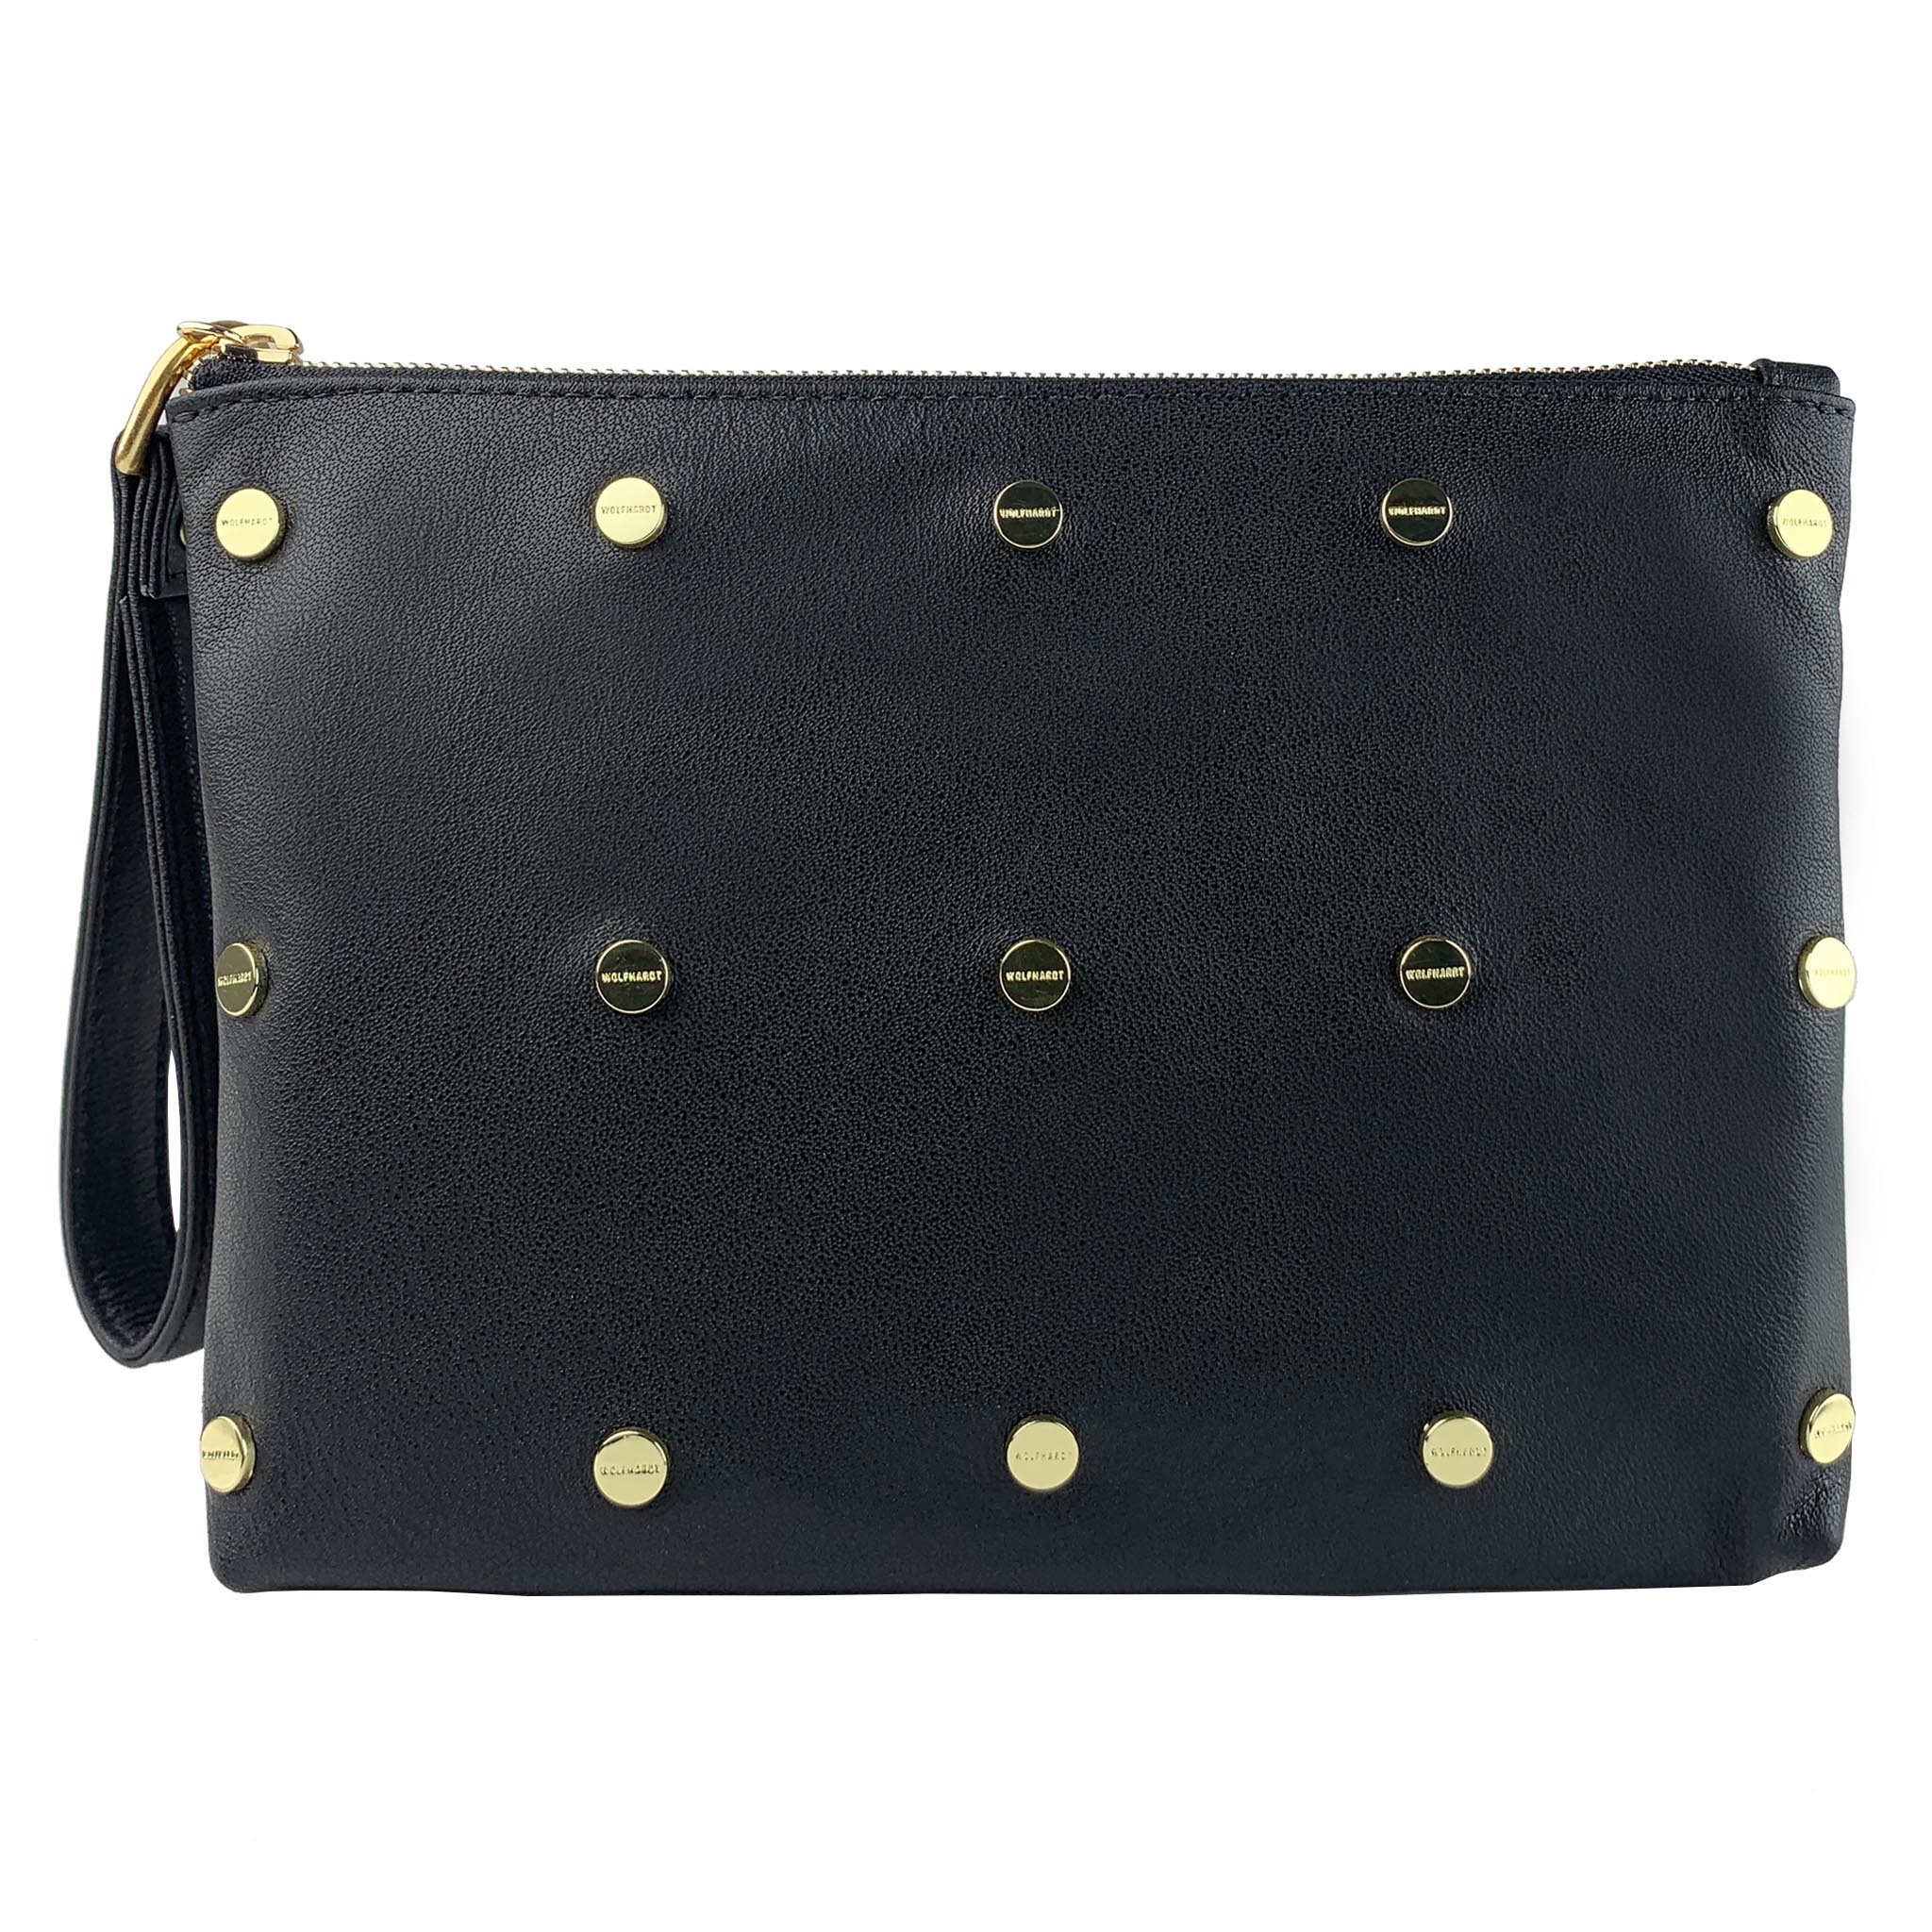 BLACK LEATHER WOMEN'S STUDDED BEUTAL FLAT ZIP POUCH